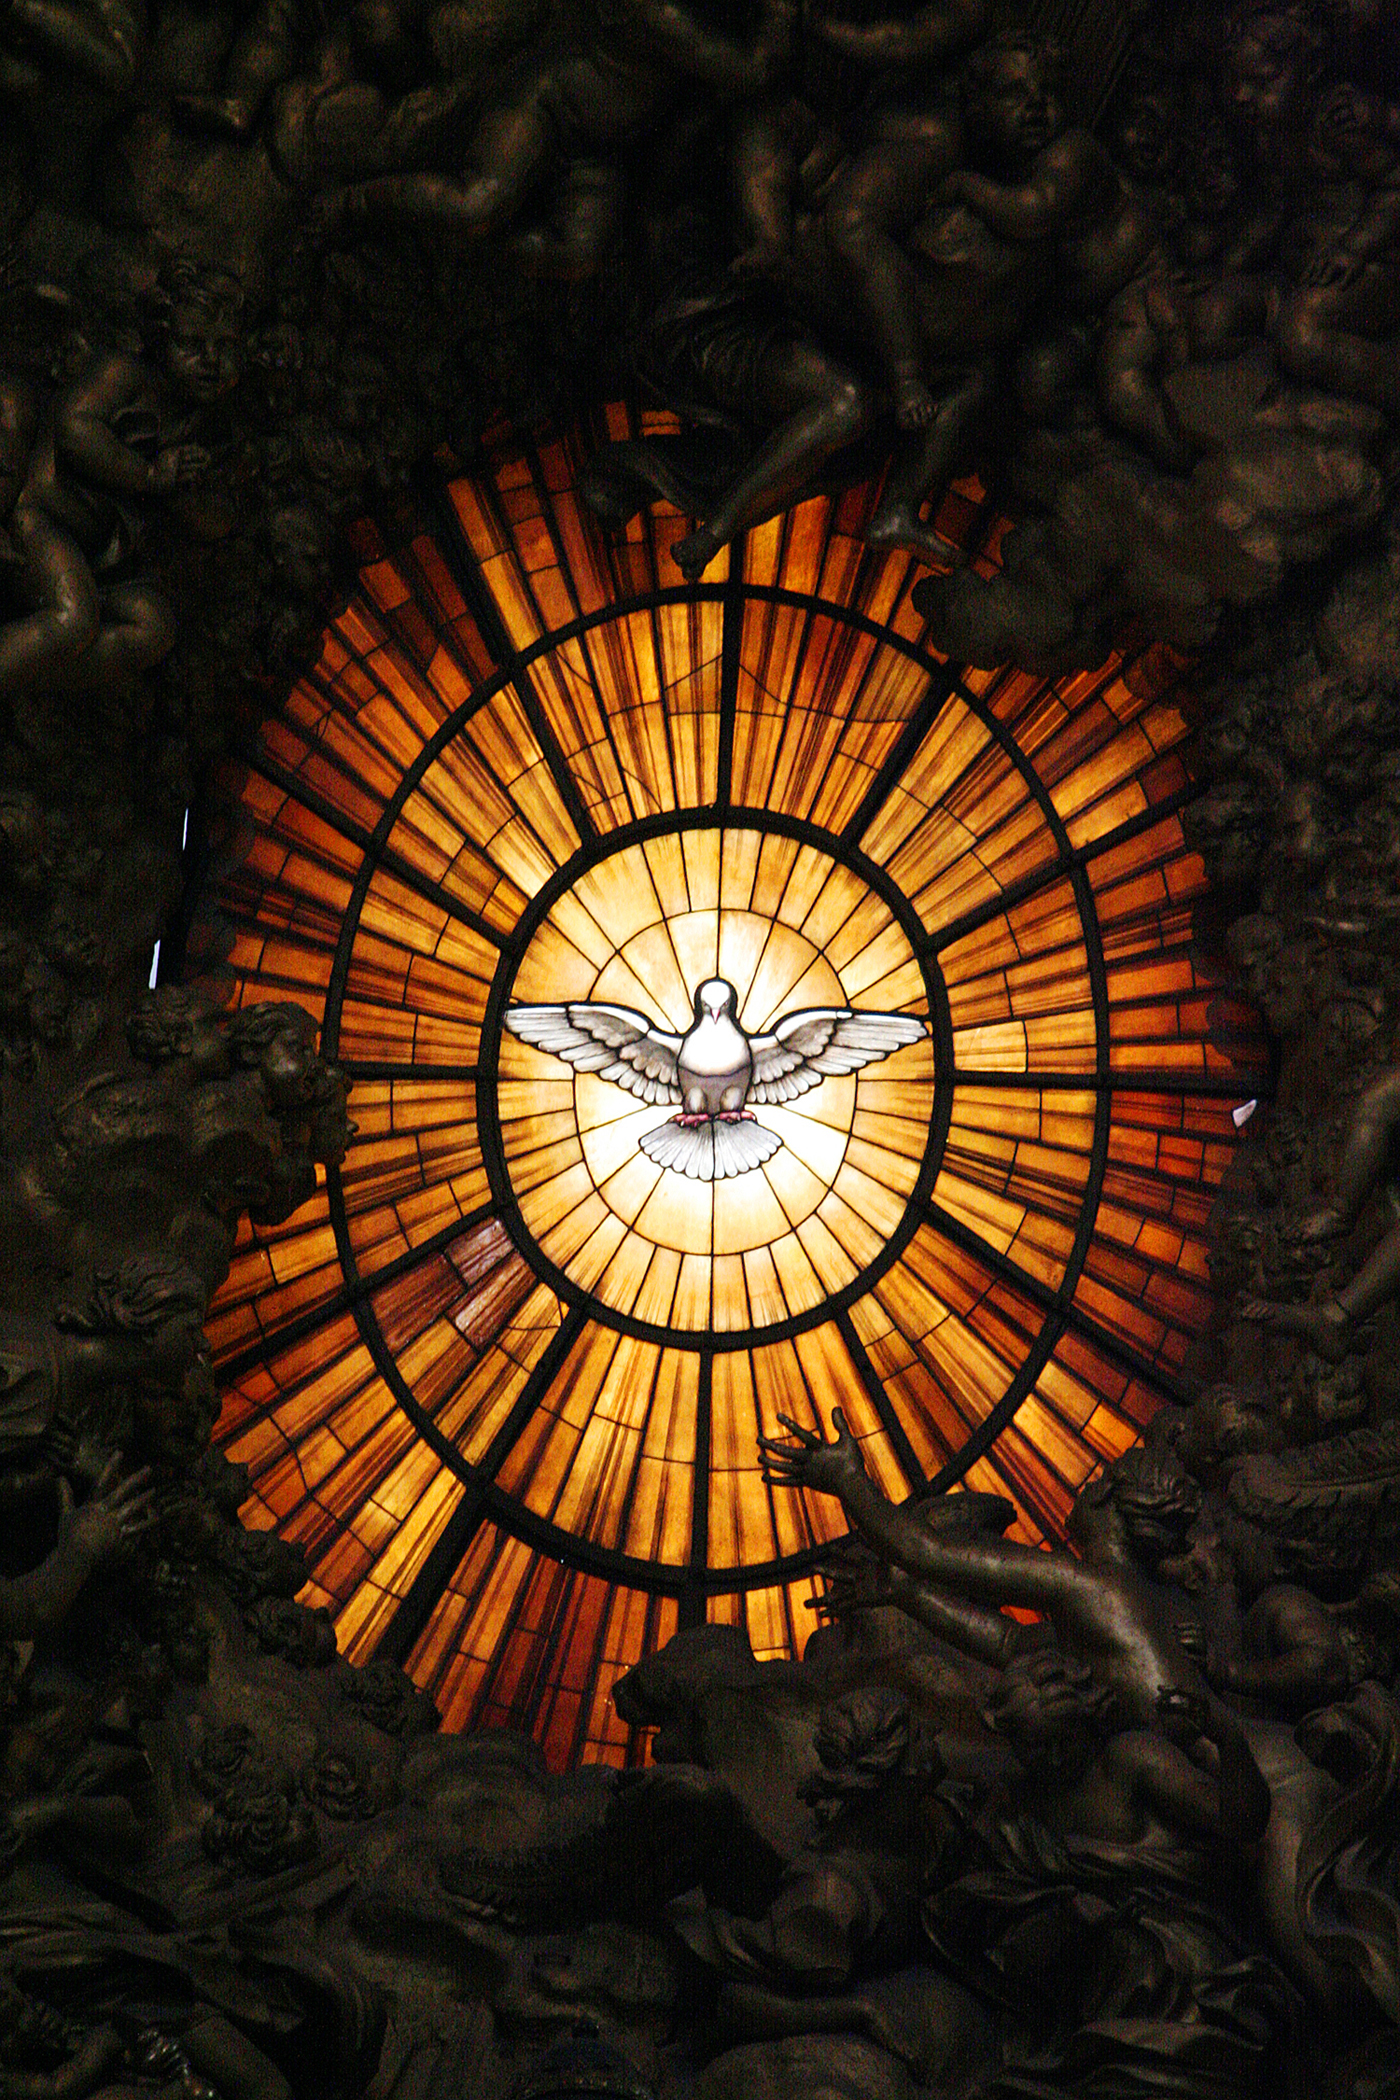 Stained glass window depicting the Holy Spirit. St. Peter's and Paul Basilica, Rome.